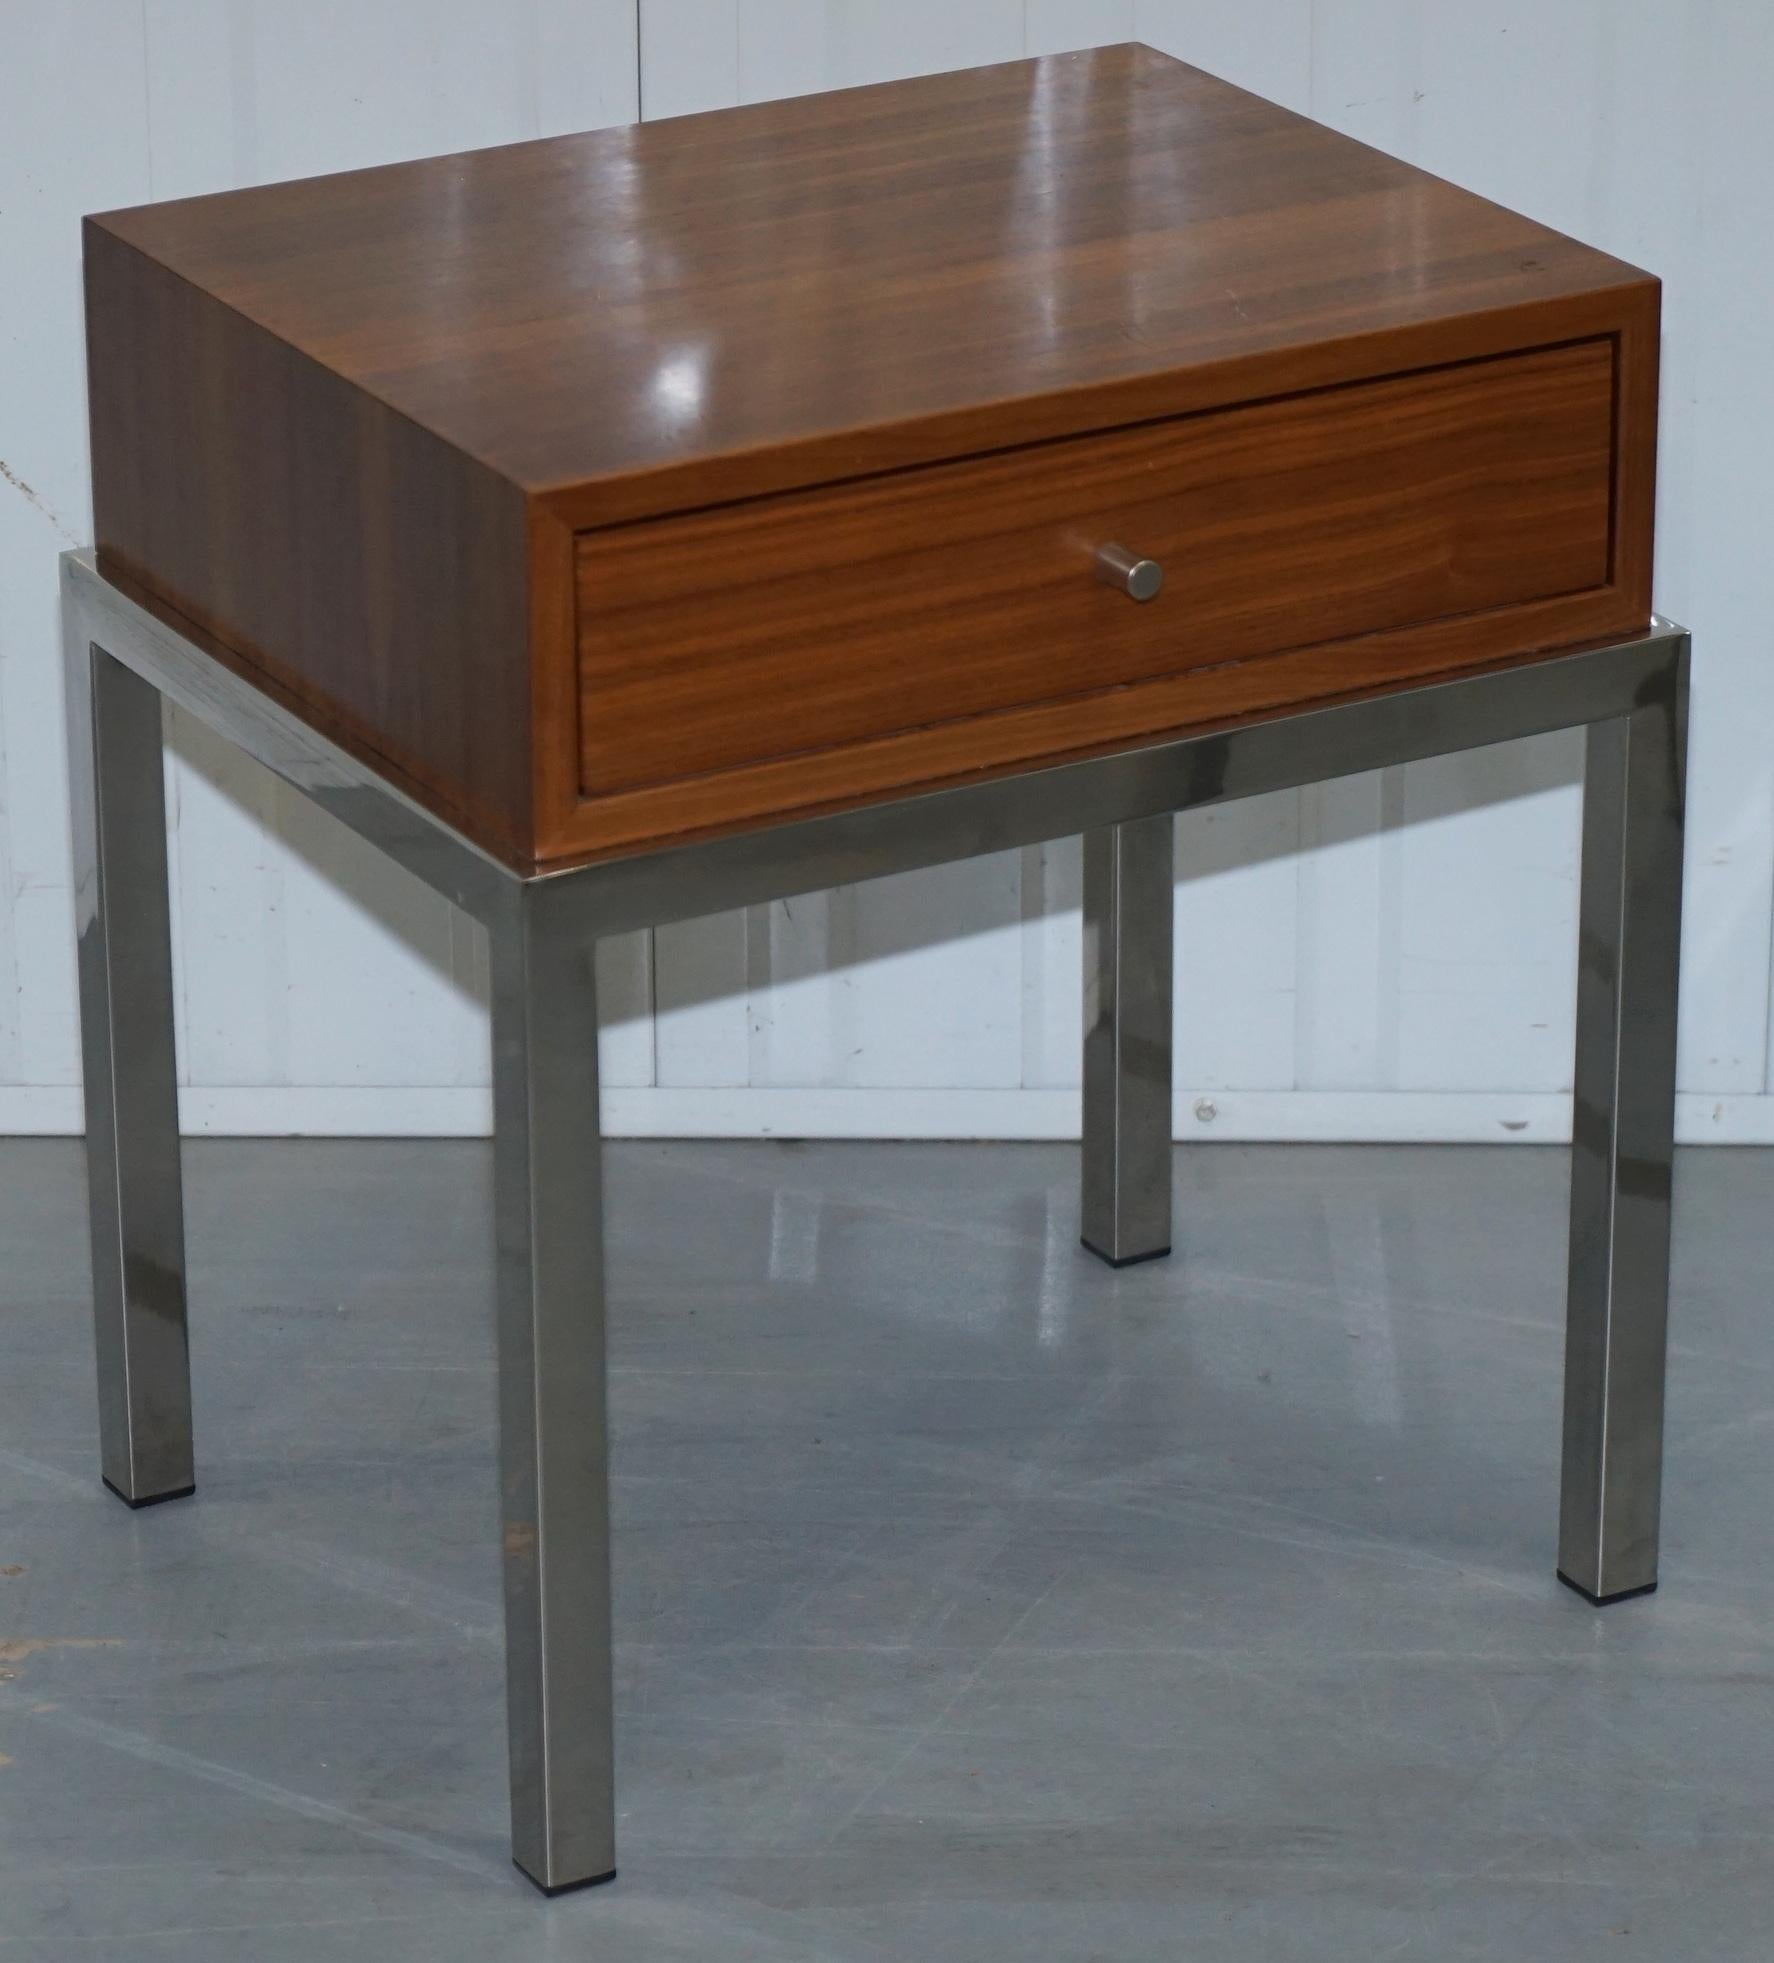 We atre delighted to offer for sale this lovely pair of chromed base teak top contemporary lamp or wine single drawer tables

I have listed under my other items a similar styled coffee table

These are a good looking and well made, decorative